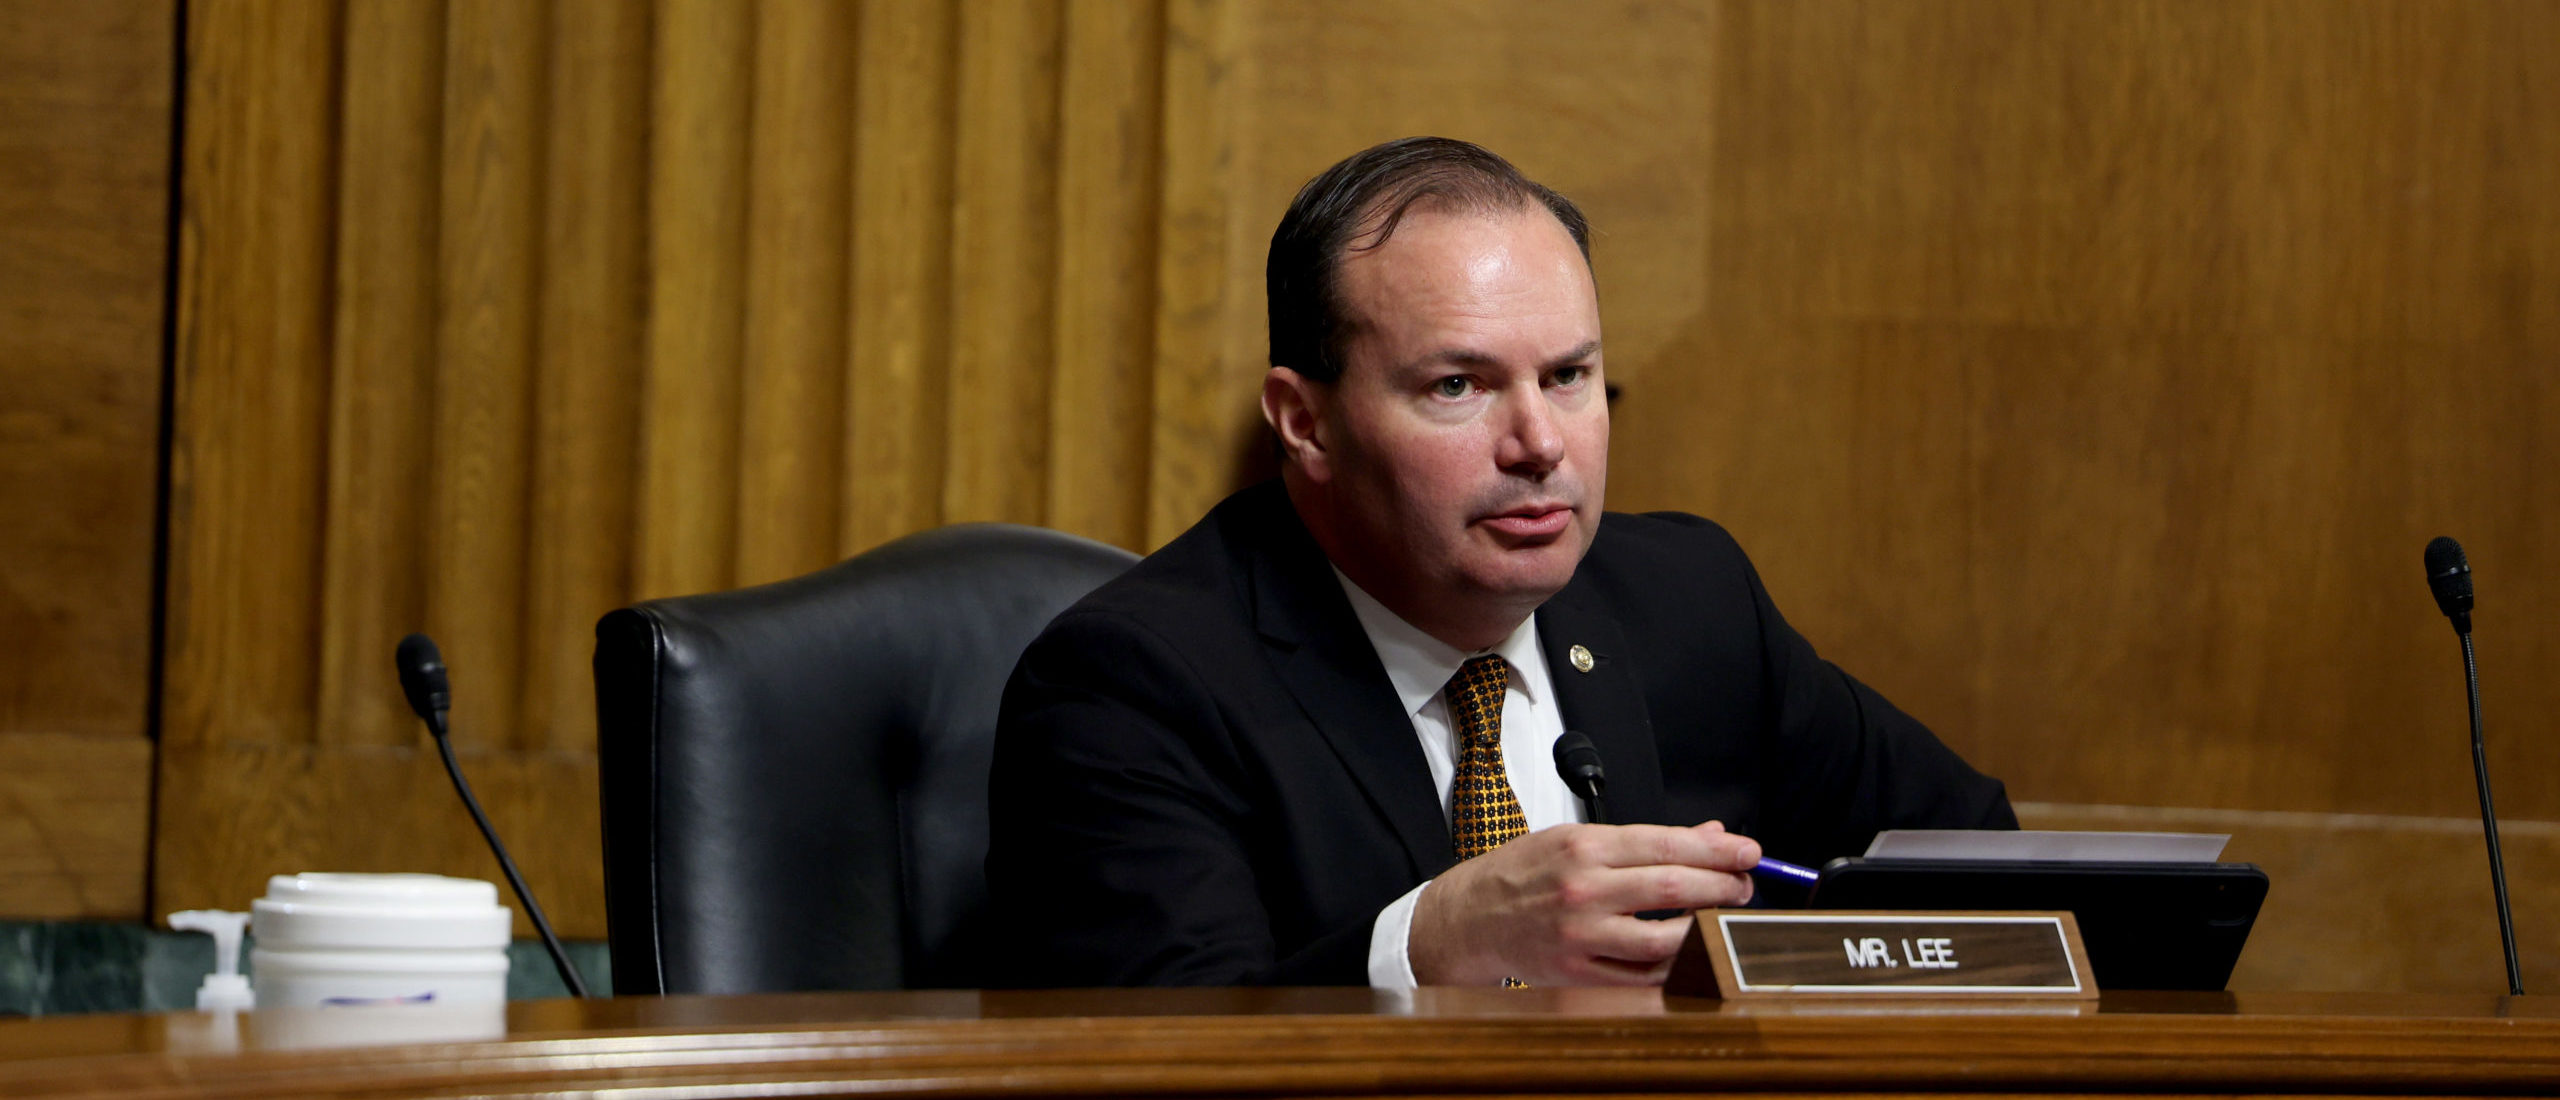 Mike Lee speaks during a hearing. (Photo by Anna Moneymaker/Getty Images)